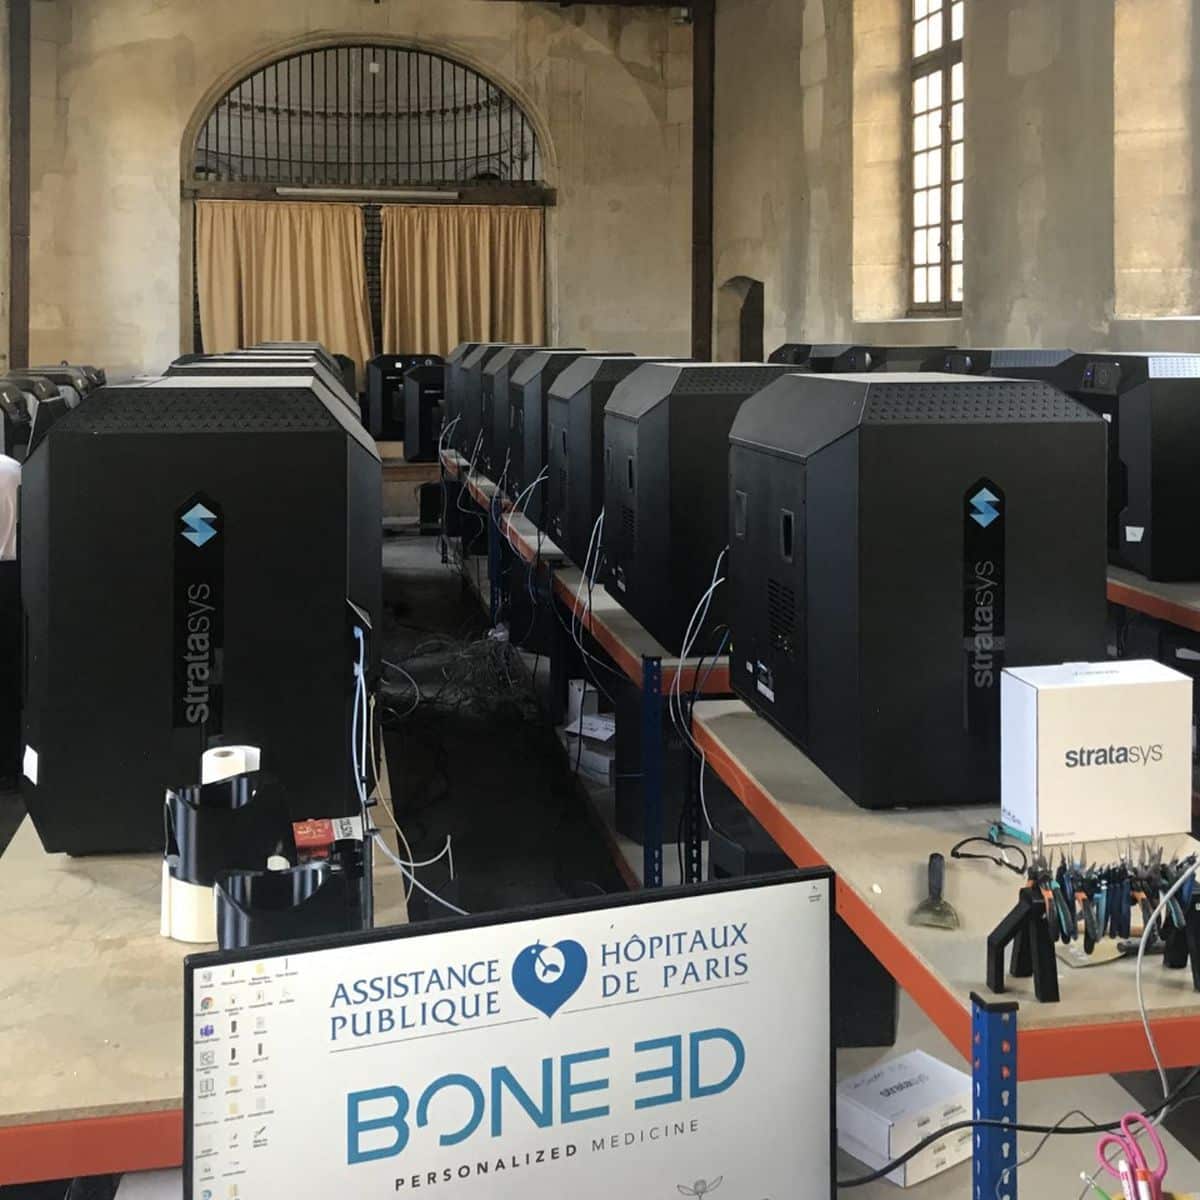 Bone 3D and its 3D printing system at hospital's service